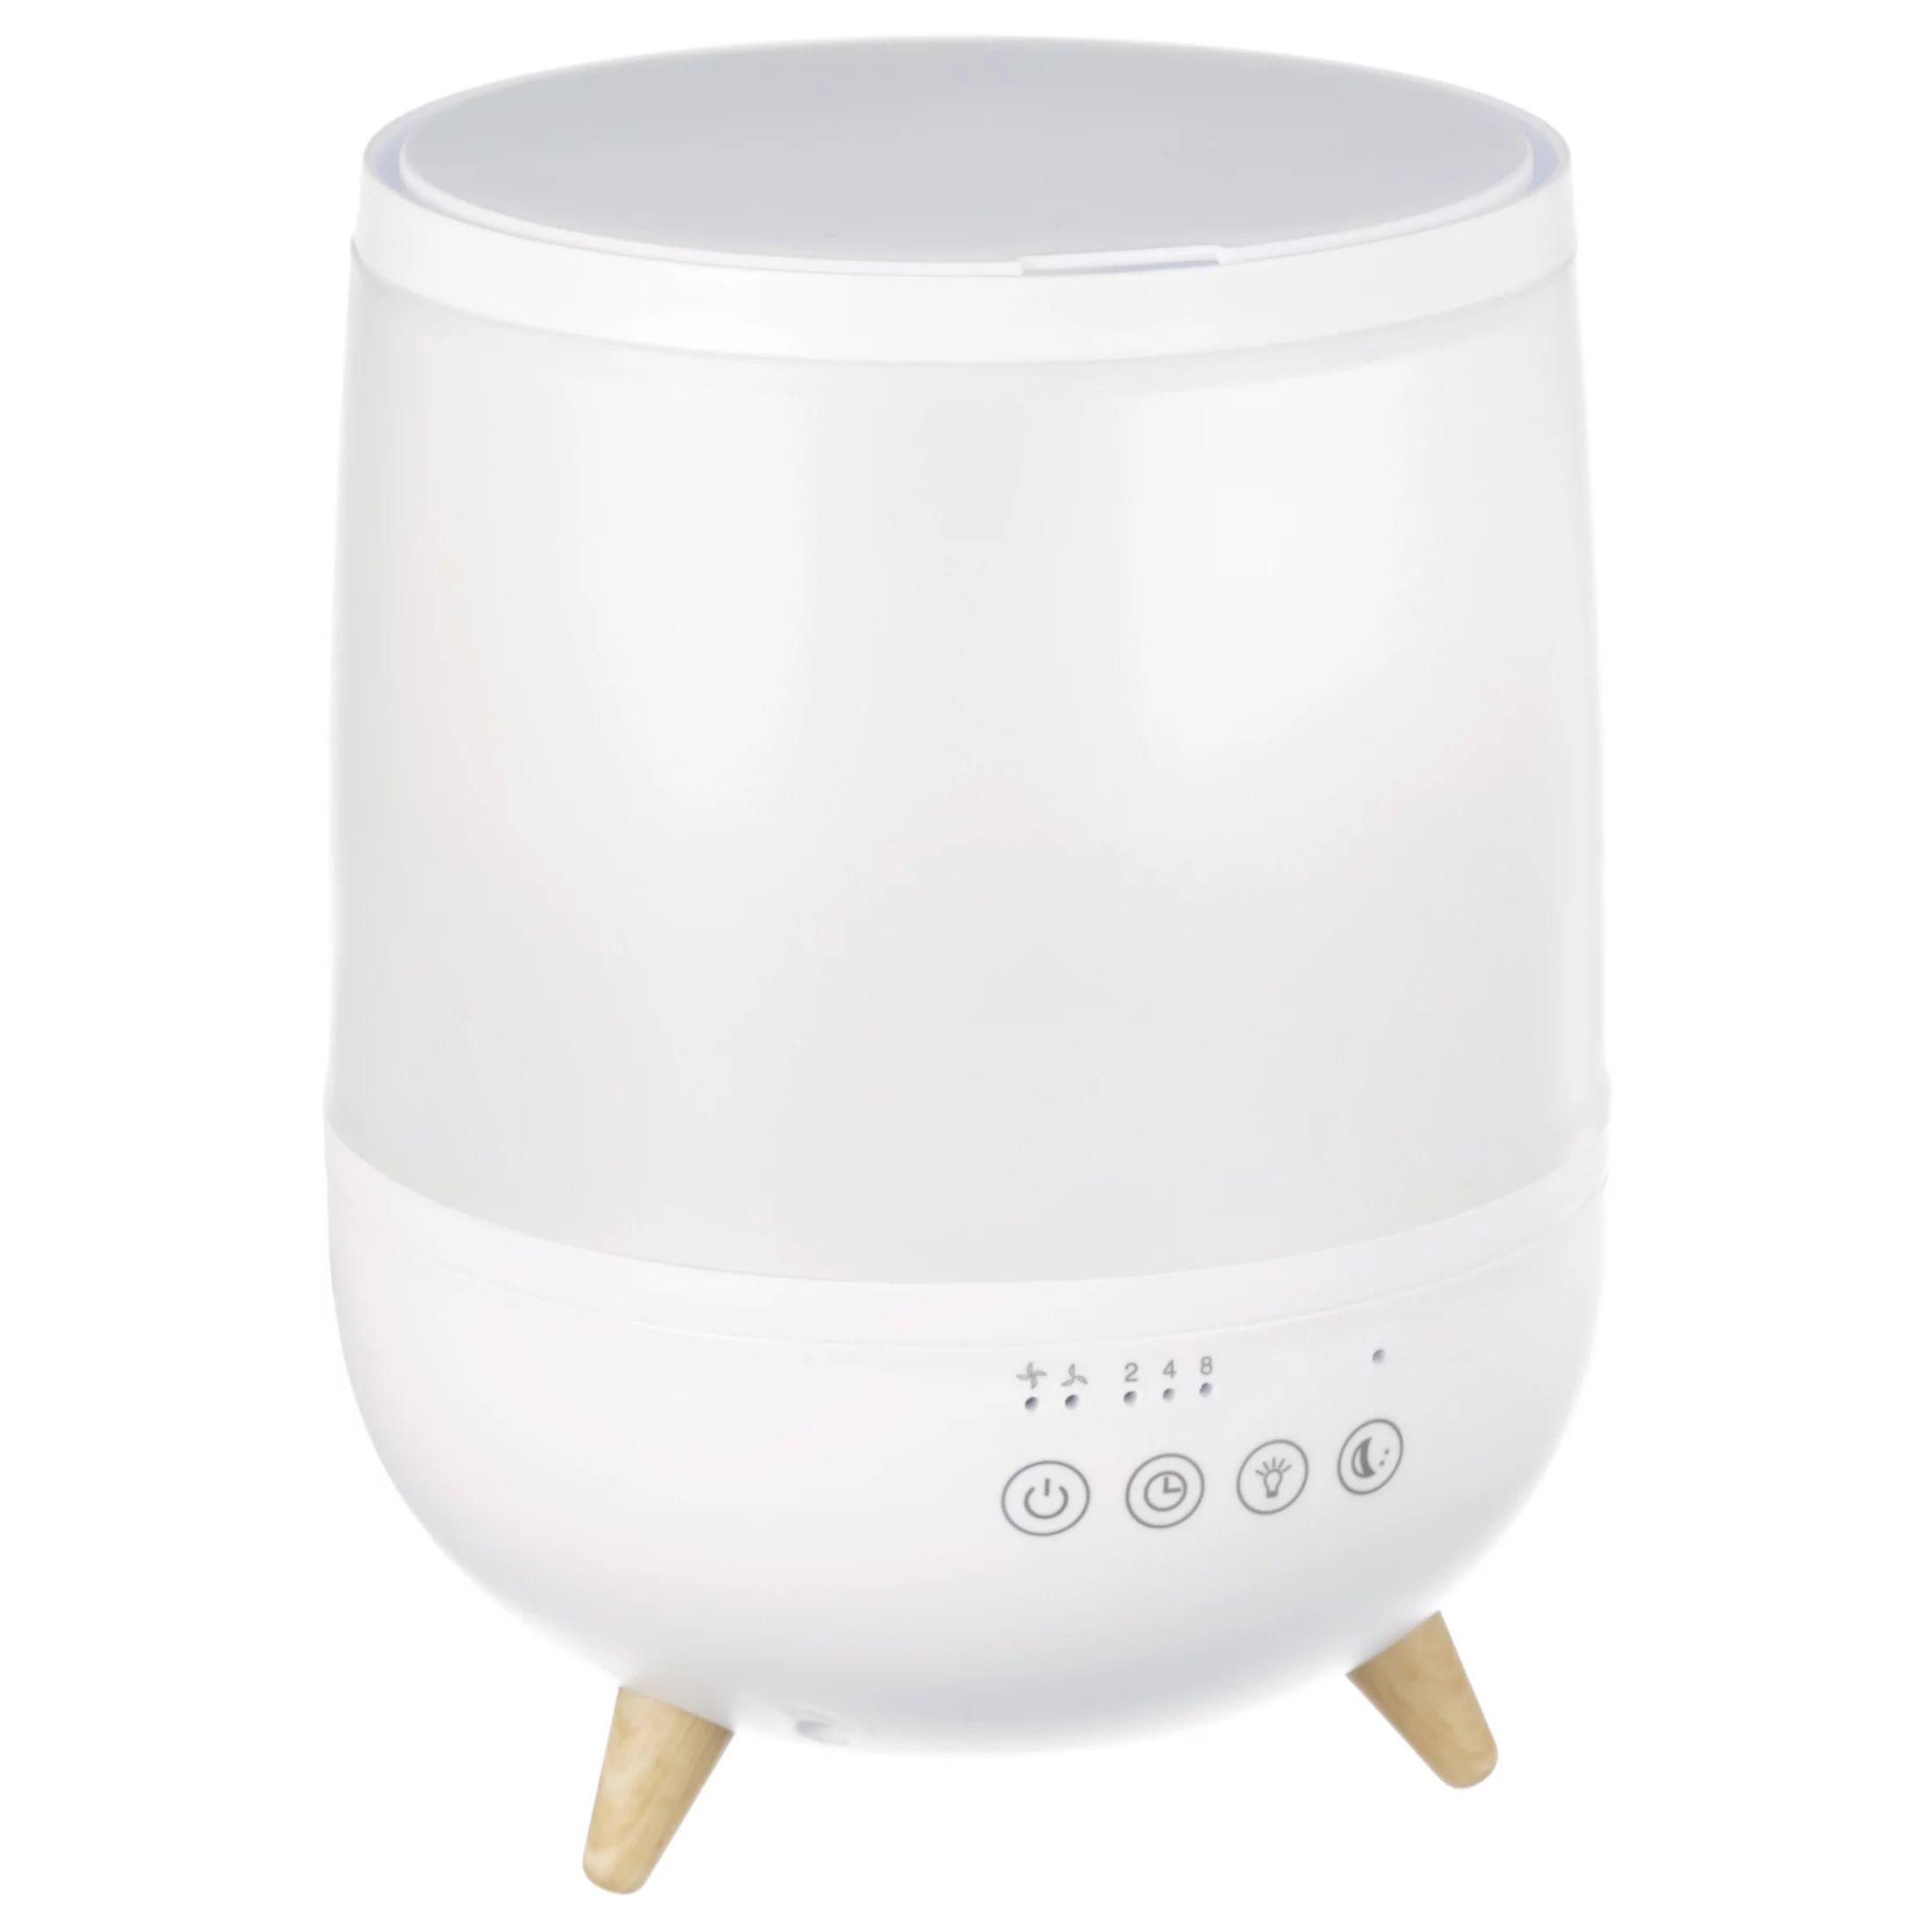 Equate Ultrasonic Humidifier, Diffuser, Cool Mist, Visible Mist, Filter-Free, 0.5 Gallon, White a... | Walmart (US)